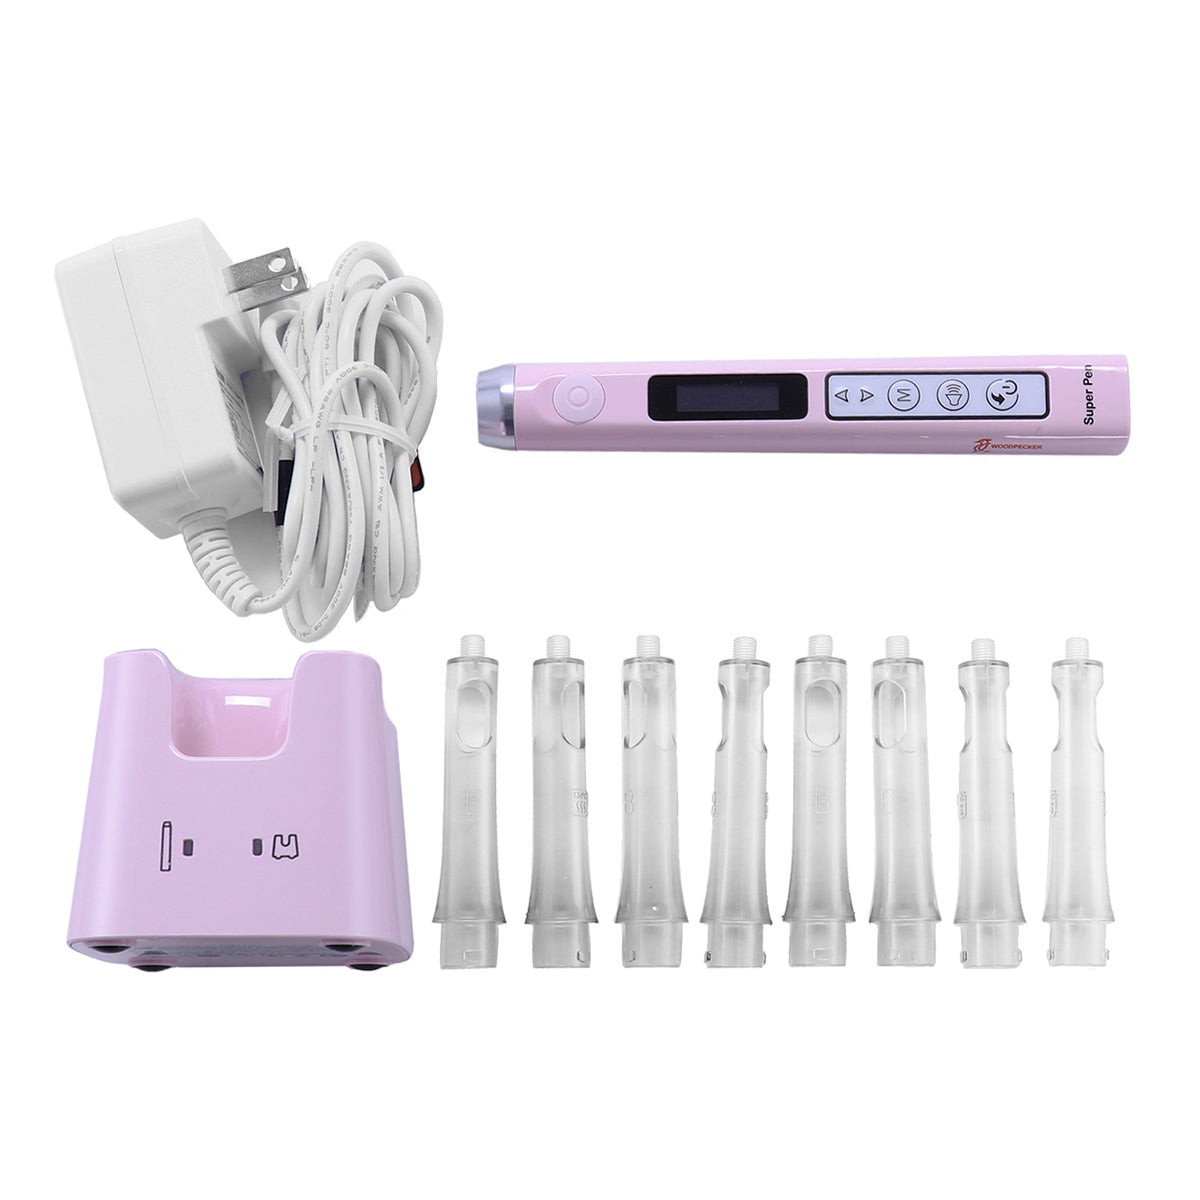 Woodpecker Super Pen Electronic Delivery Syringe System - pairaydental.com